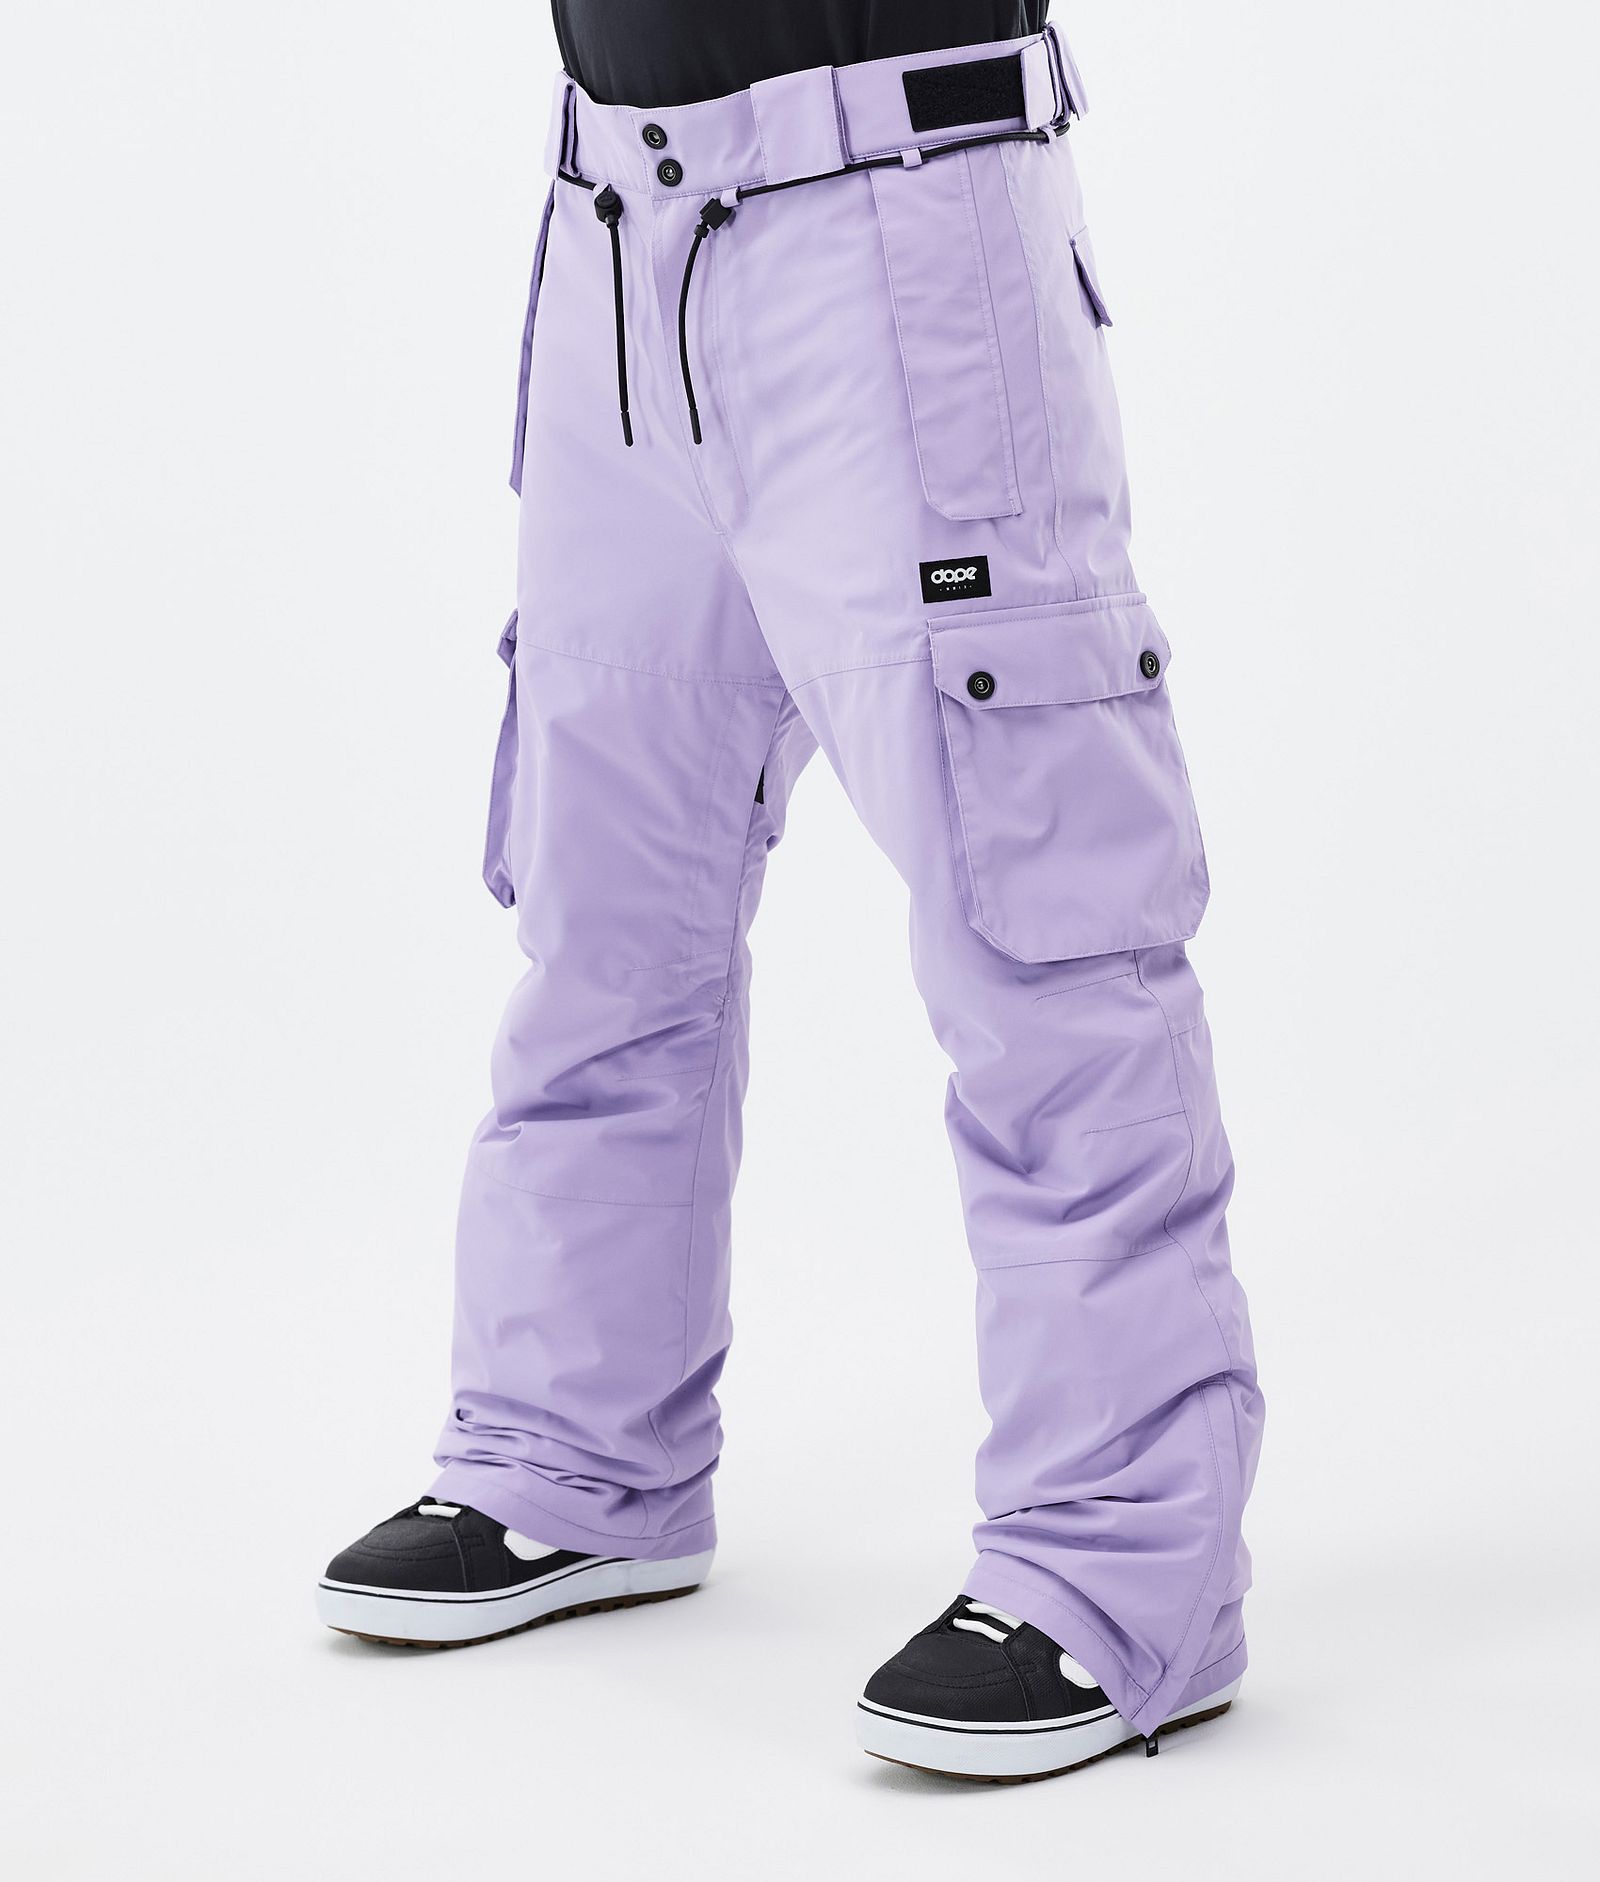 Iconic Snowboard Pants Men Faded Violet Renewed, Image 1 of 7